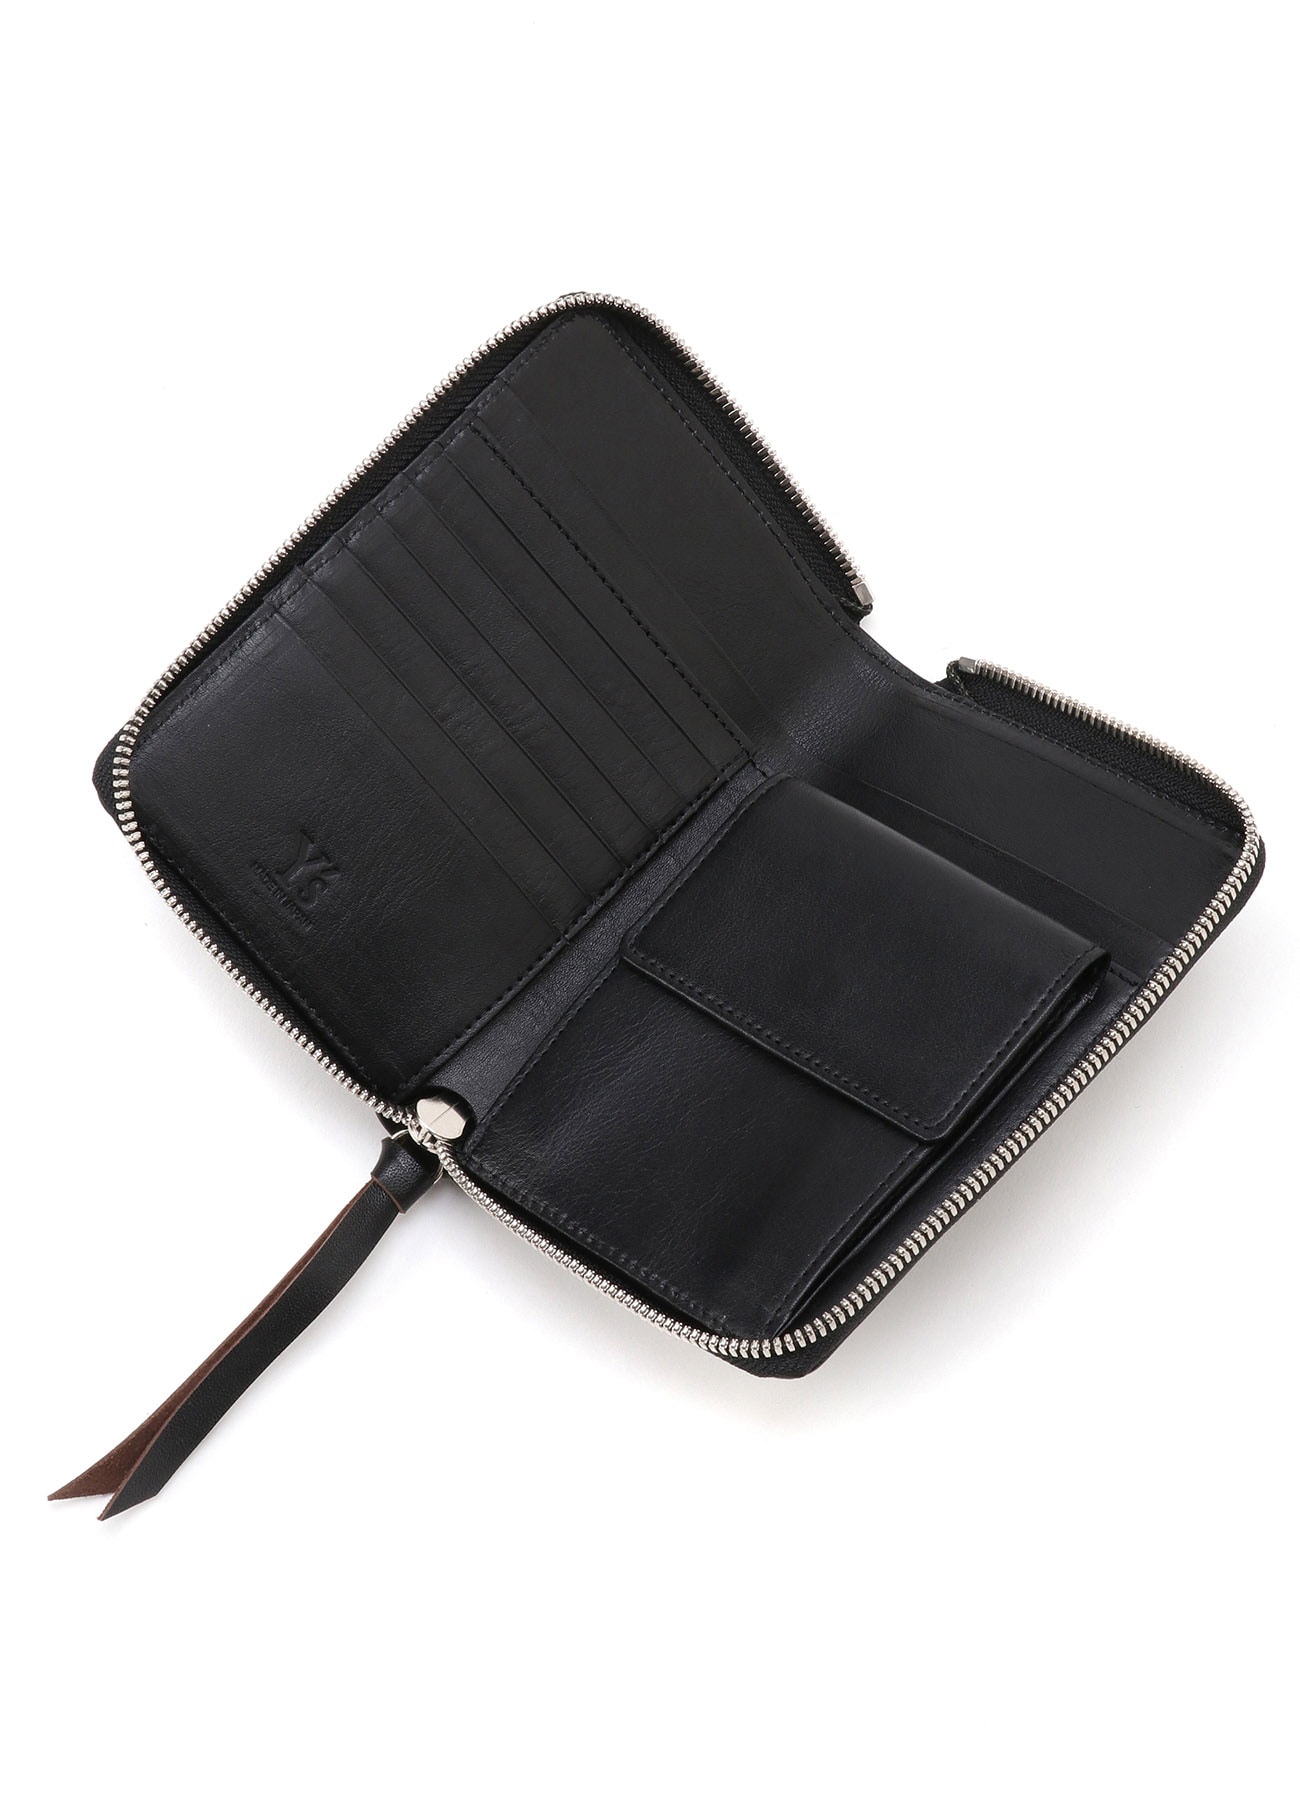 HORSE LEATHER THREE SIDE OPEN WALLET